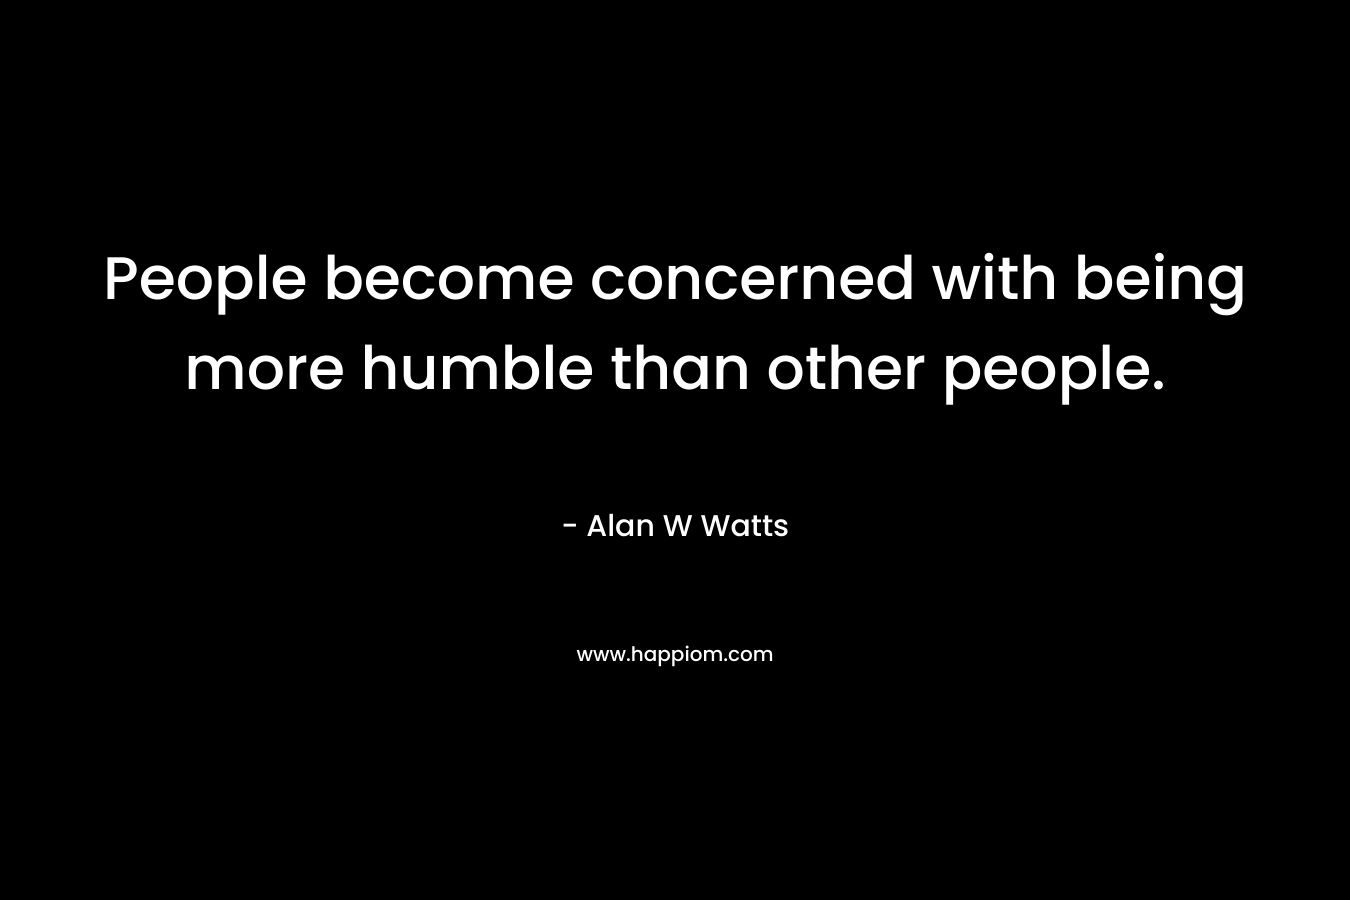 People become concerned with being more humble than other people.